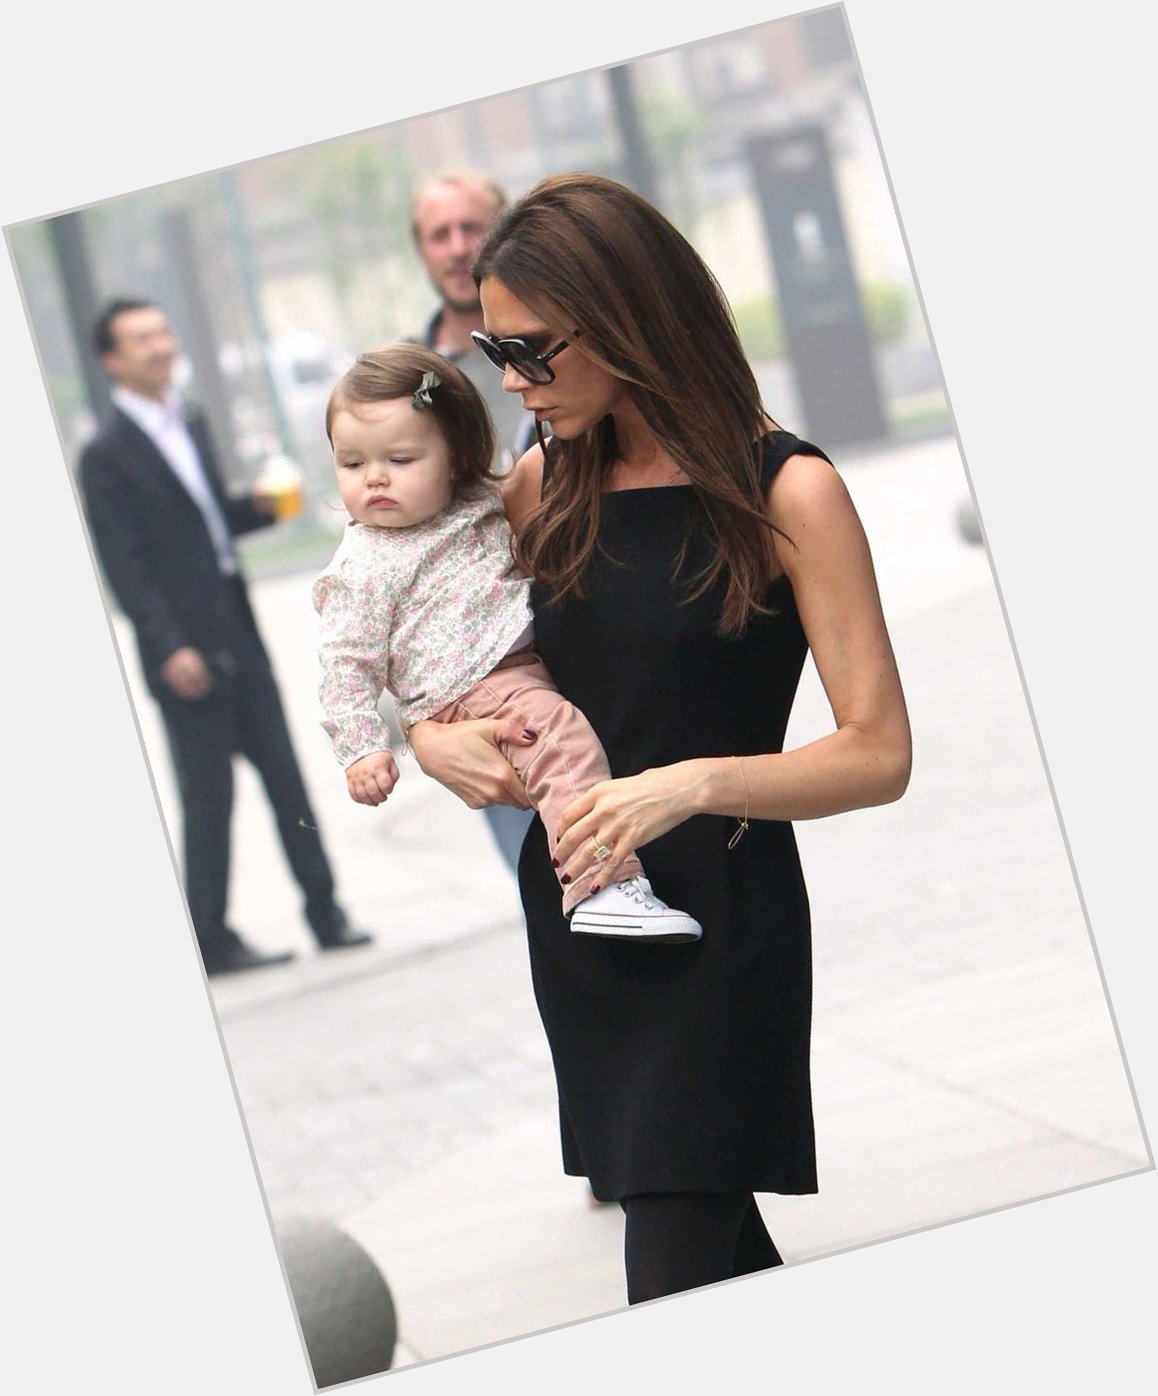 Happy Birthday, Victoria Beckham! A Look Back at Her Best Beauty Moments, from Posh 